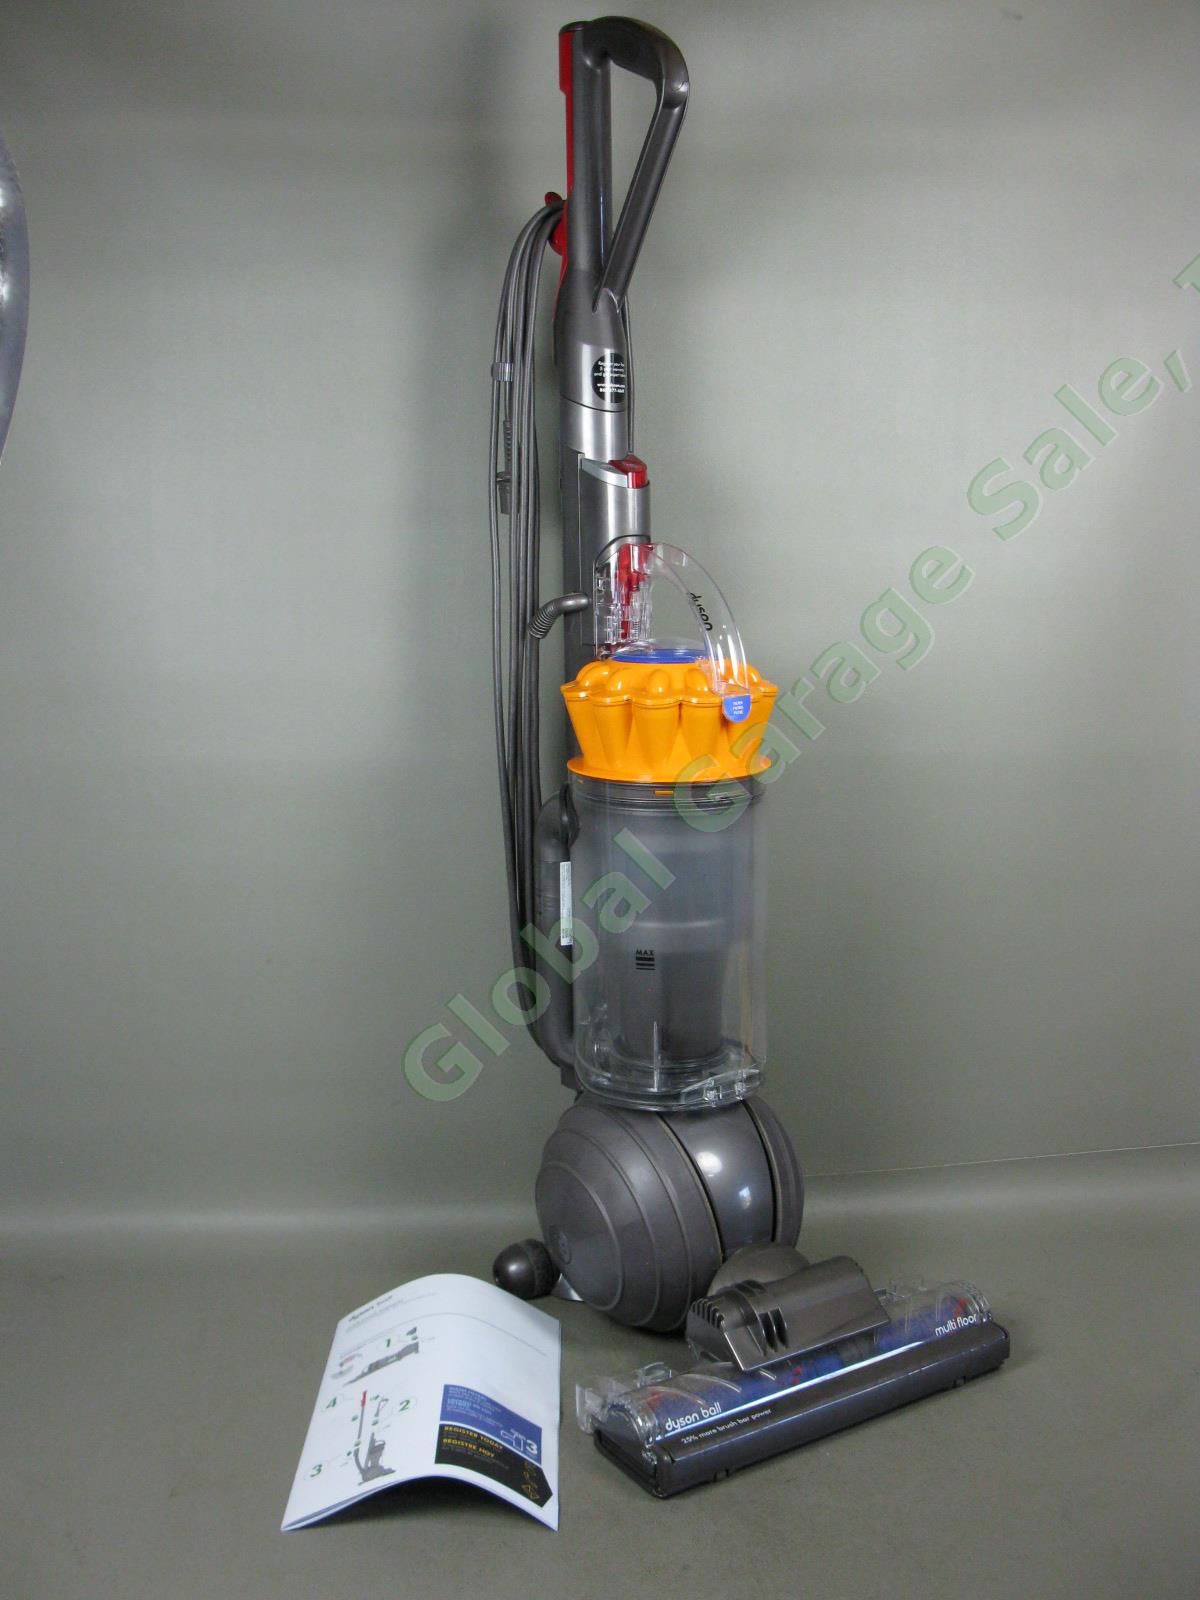 Dyson UP13 Multi Floor Ball Bagless Upright Vacuum Cleaner W/ Manual $400 Retail